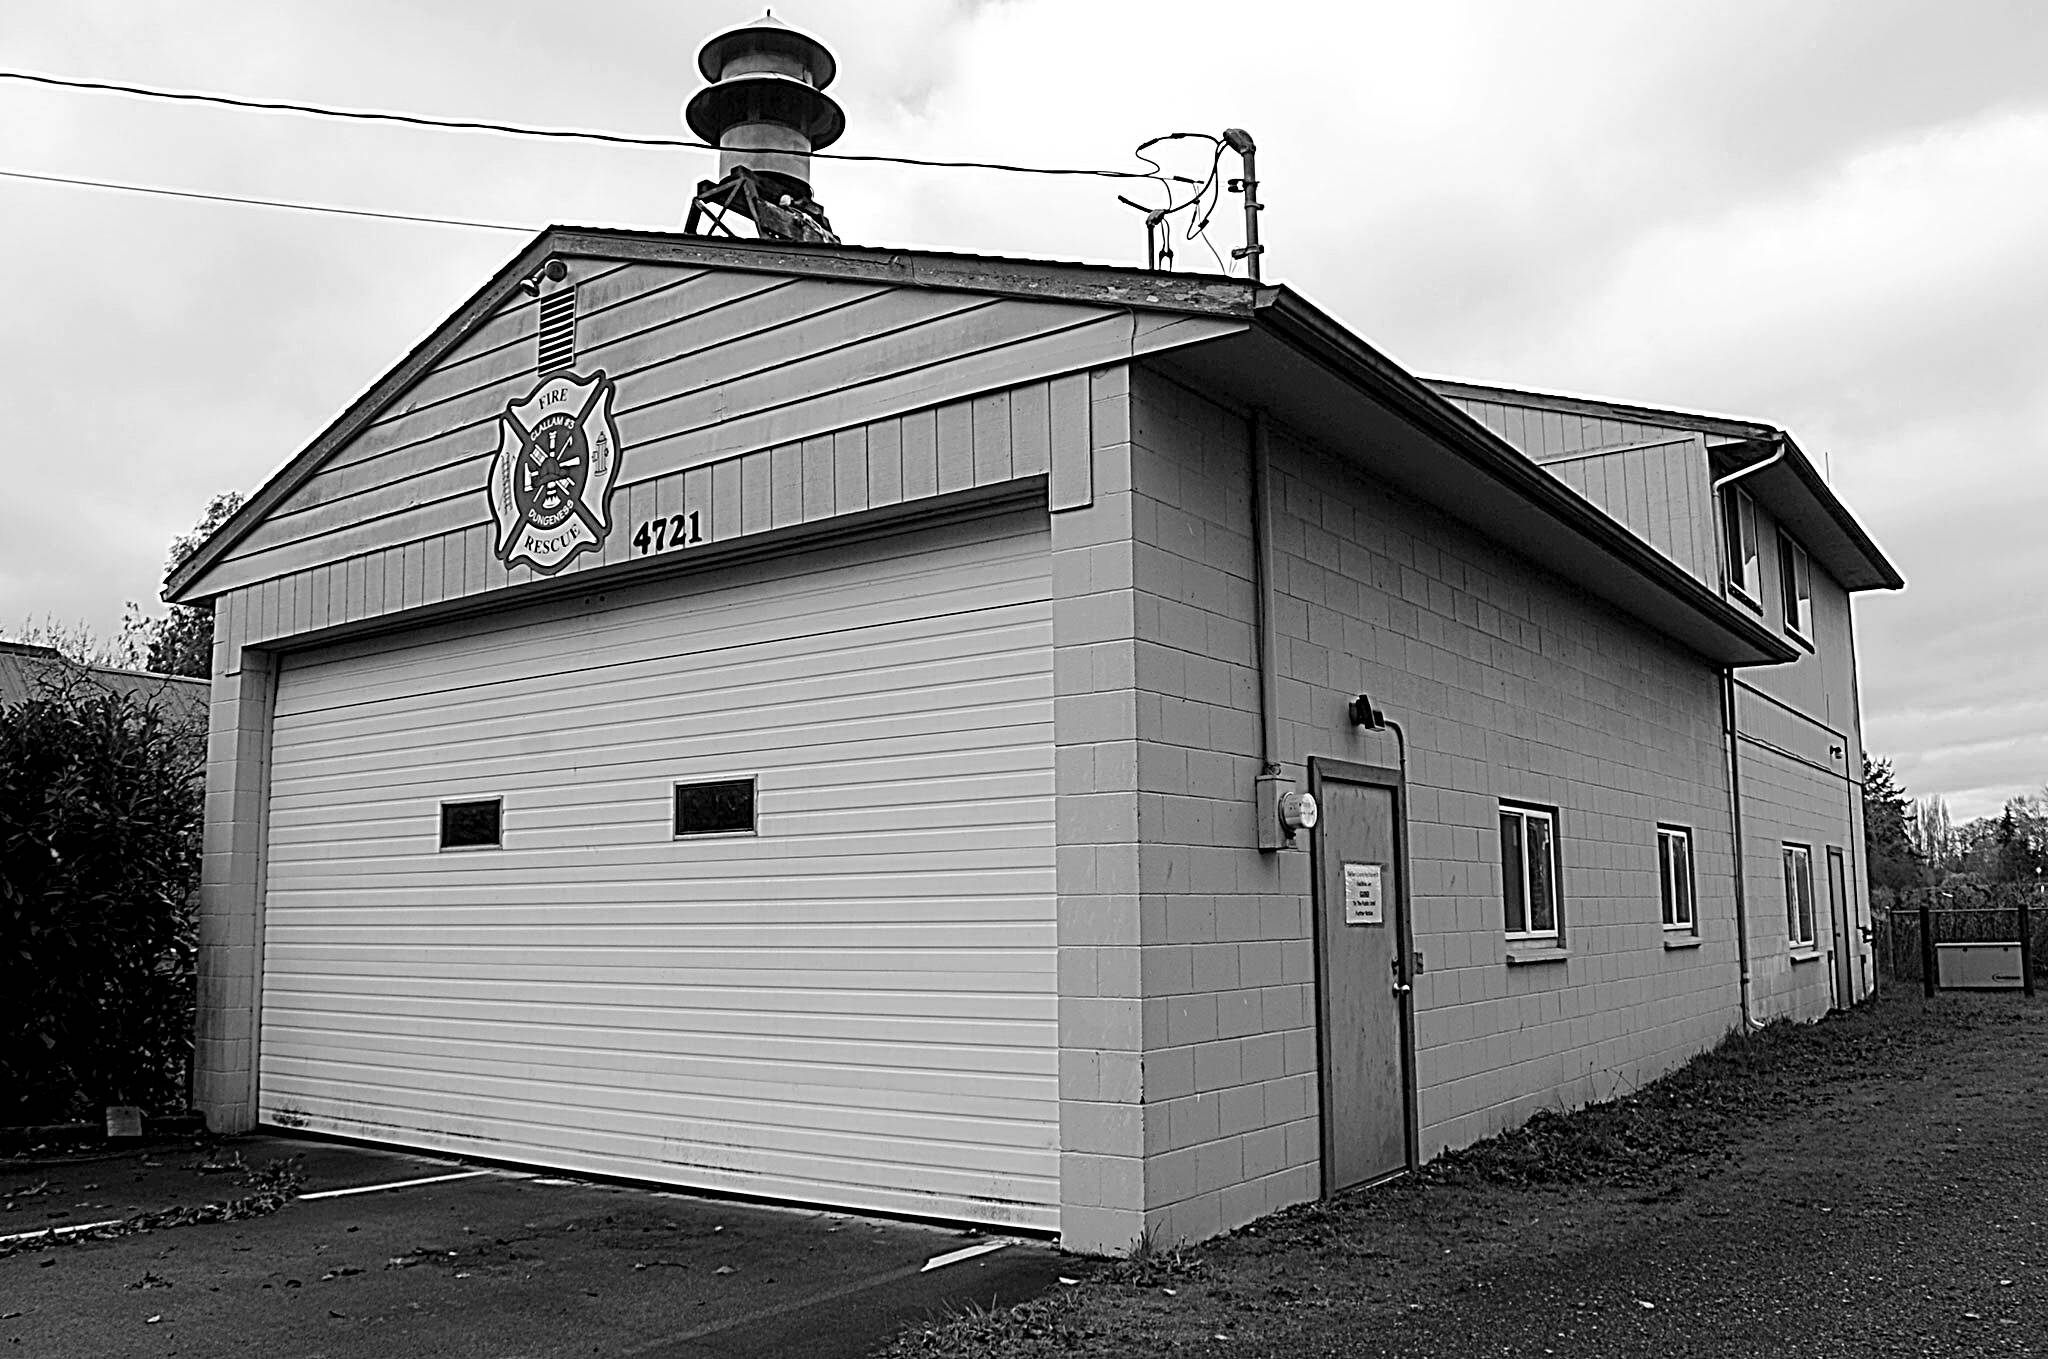 Next year’s Clallam County Fire District 3 budget includes funds to design a new building for Dungeness Station 31, pictured, and Carlsborg Station 33. Sequim Gazette photo by Matthew Nash